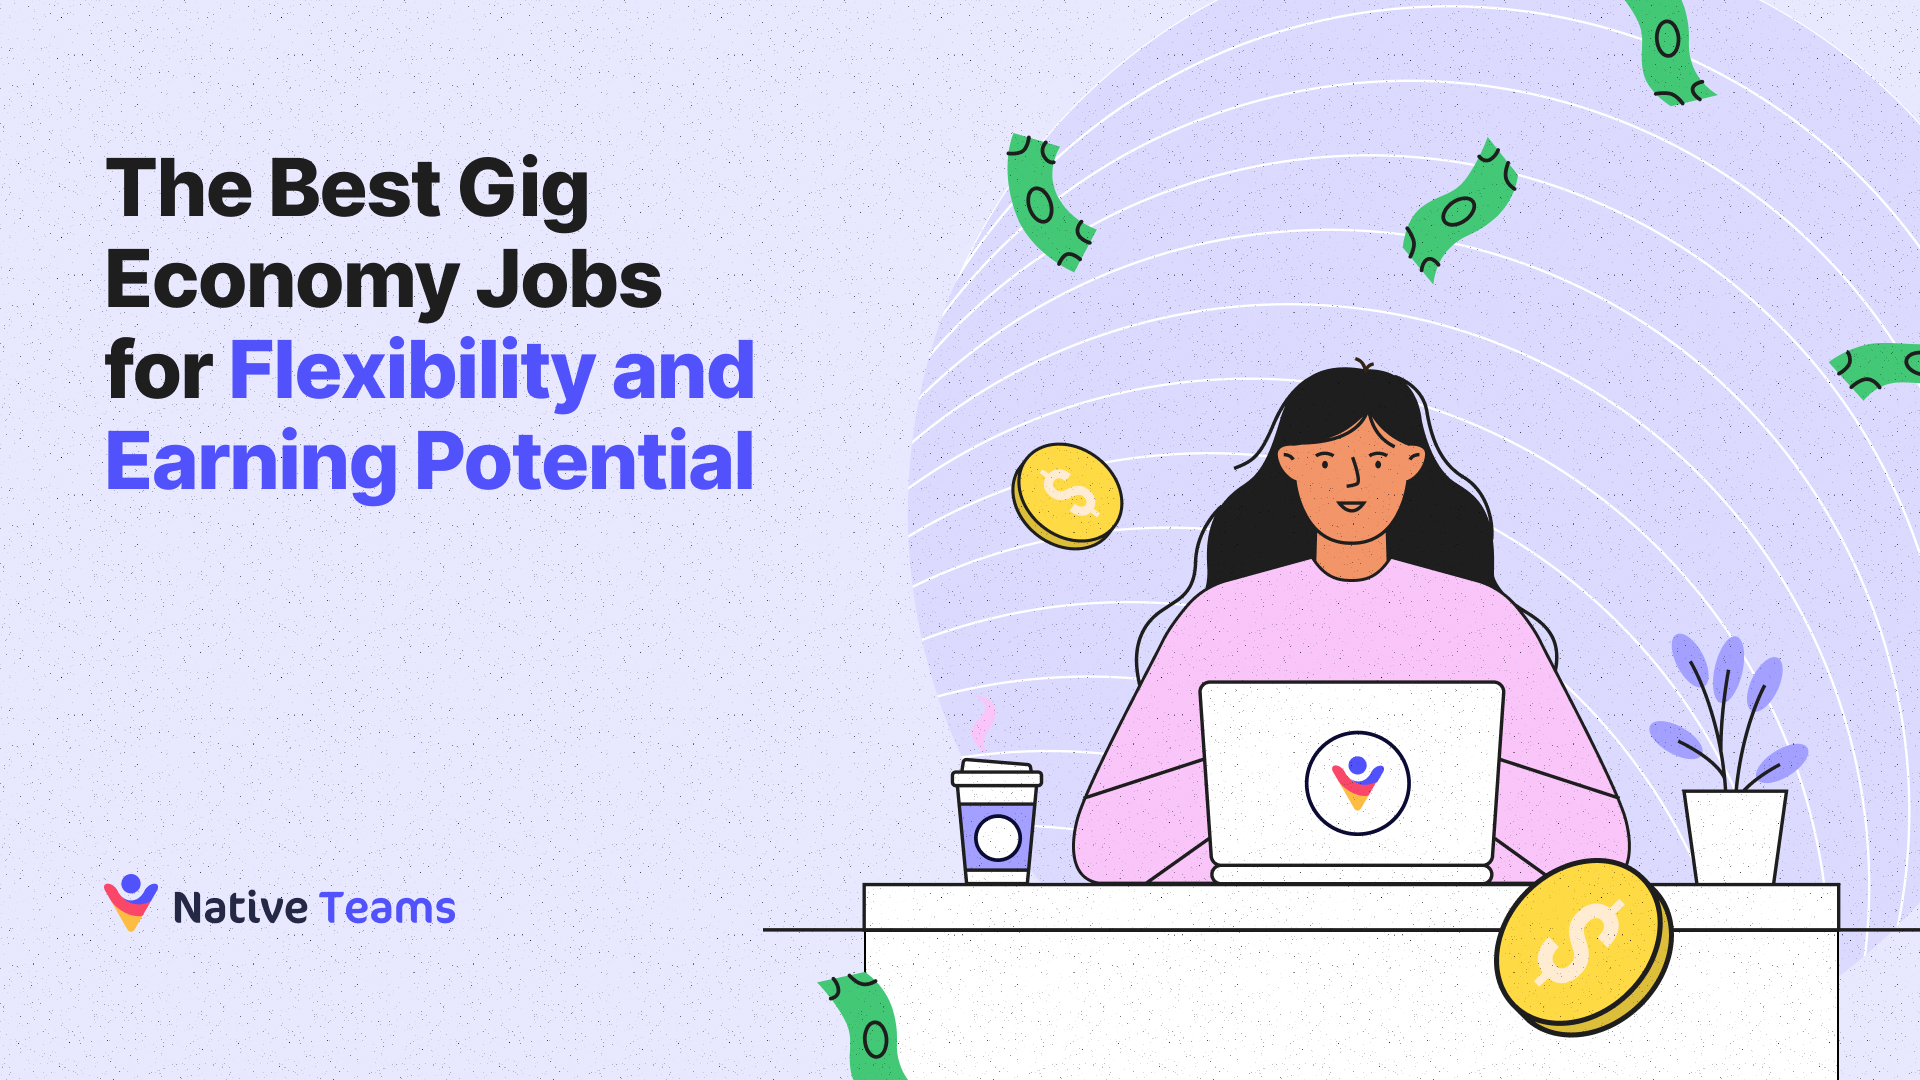 The Best Gig Economy Jobs for Flexibility and Earning Potential